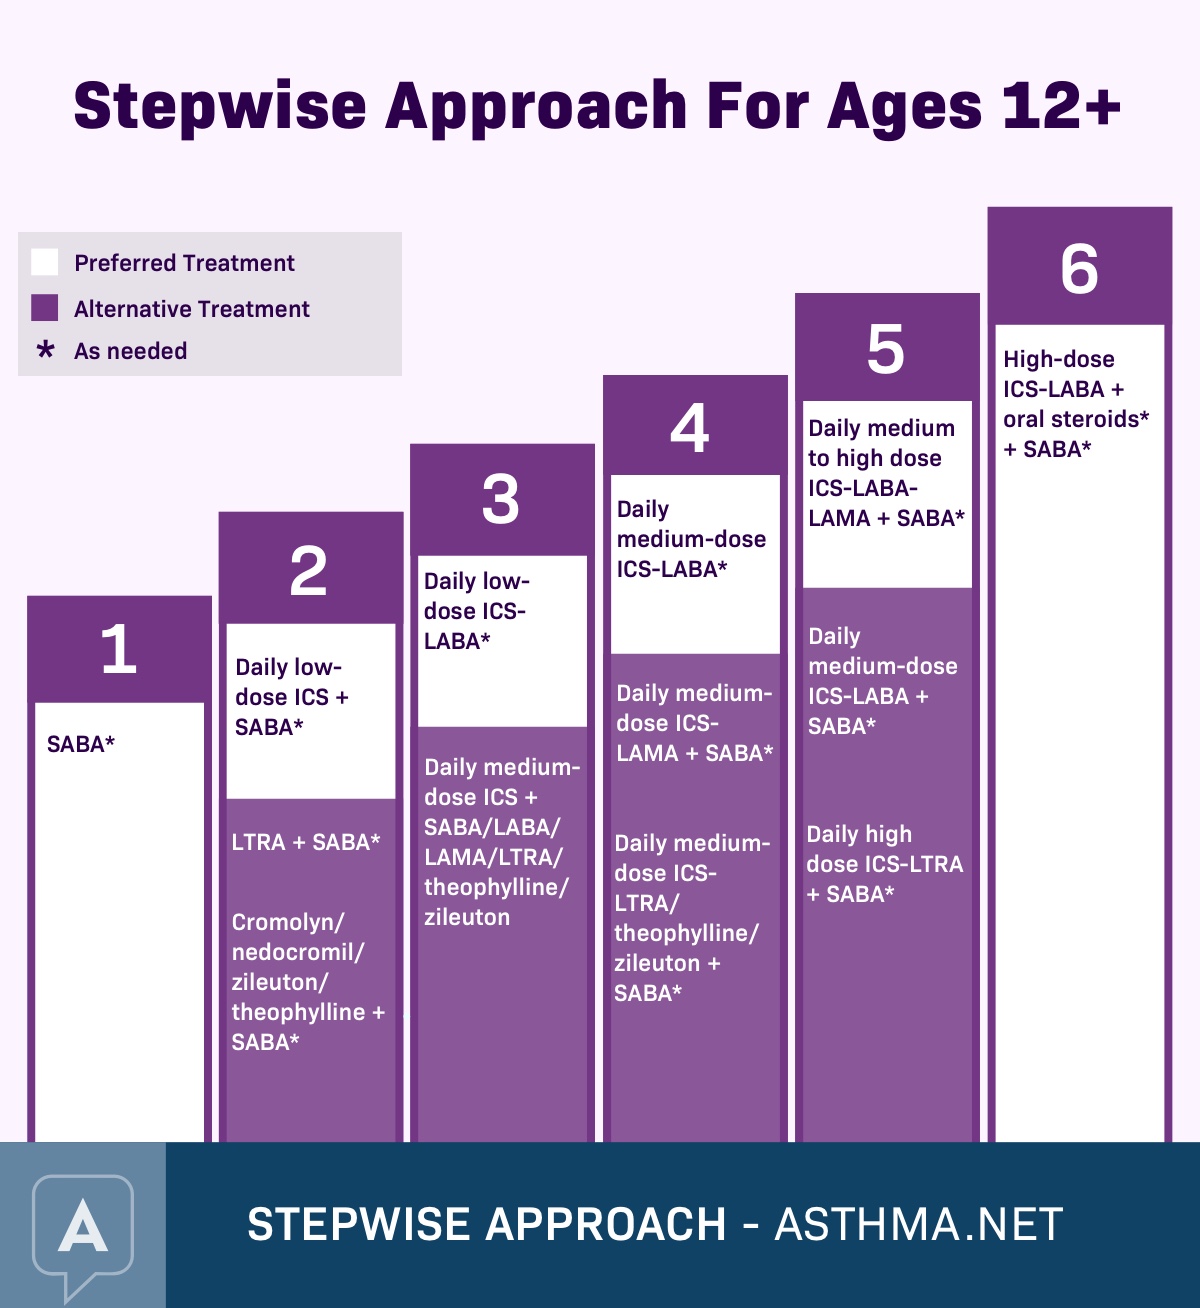 Stepwise Approach For Ages 12 +